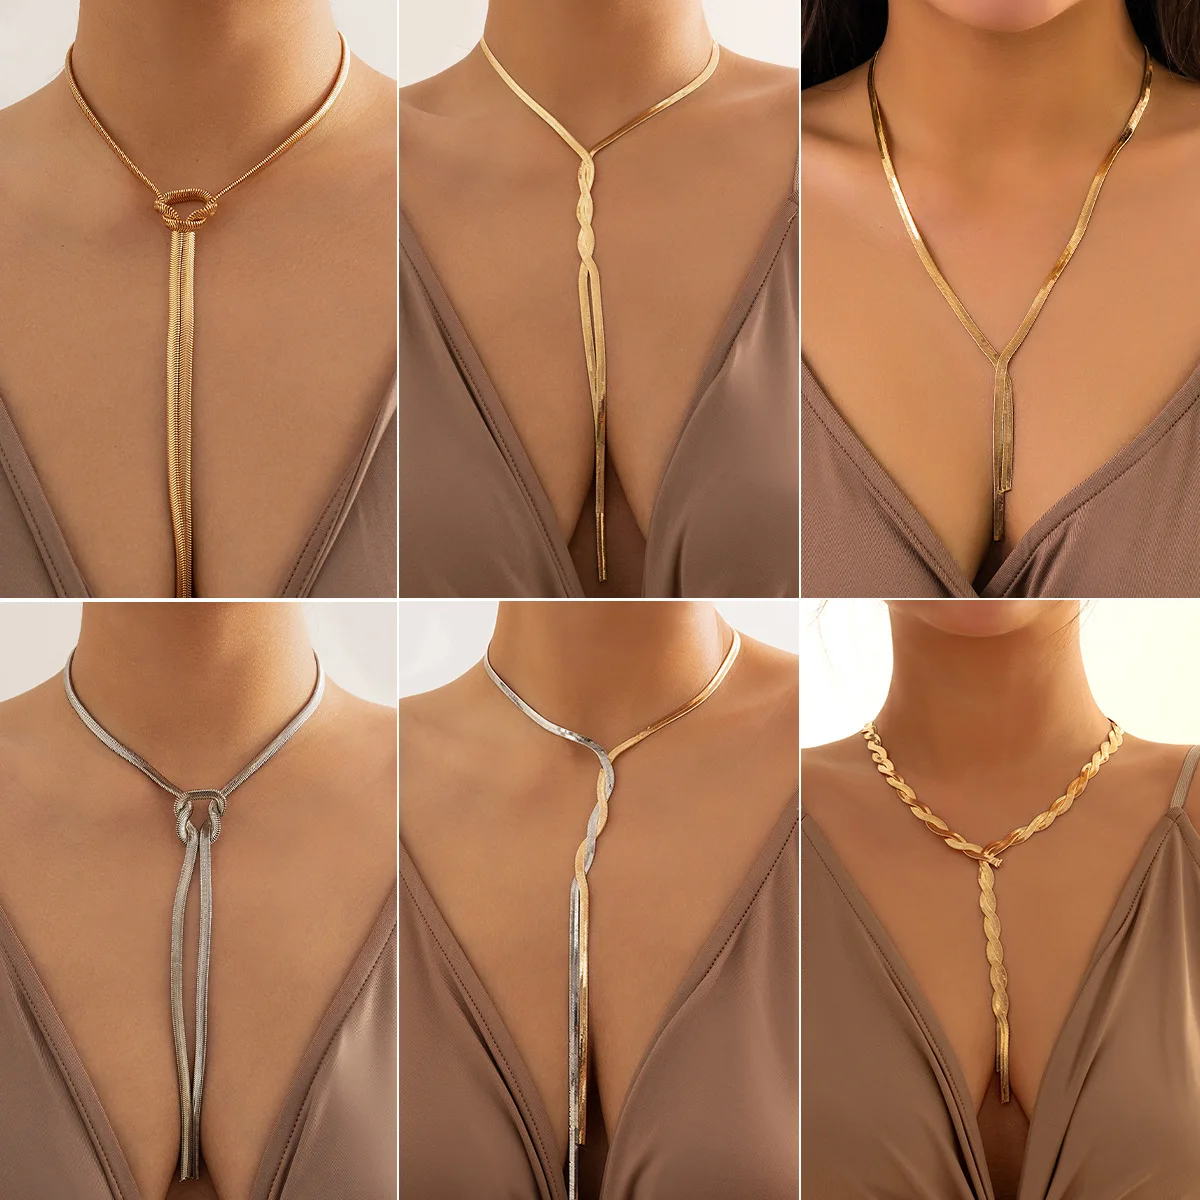 

Adjustable Flat Snake Chain Long Chain Necklace For Women Luxury Long Tassel Twisted Choker Chest Neck Jewelry Gift